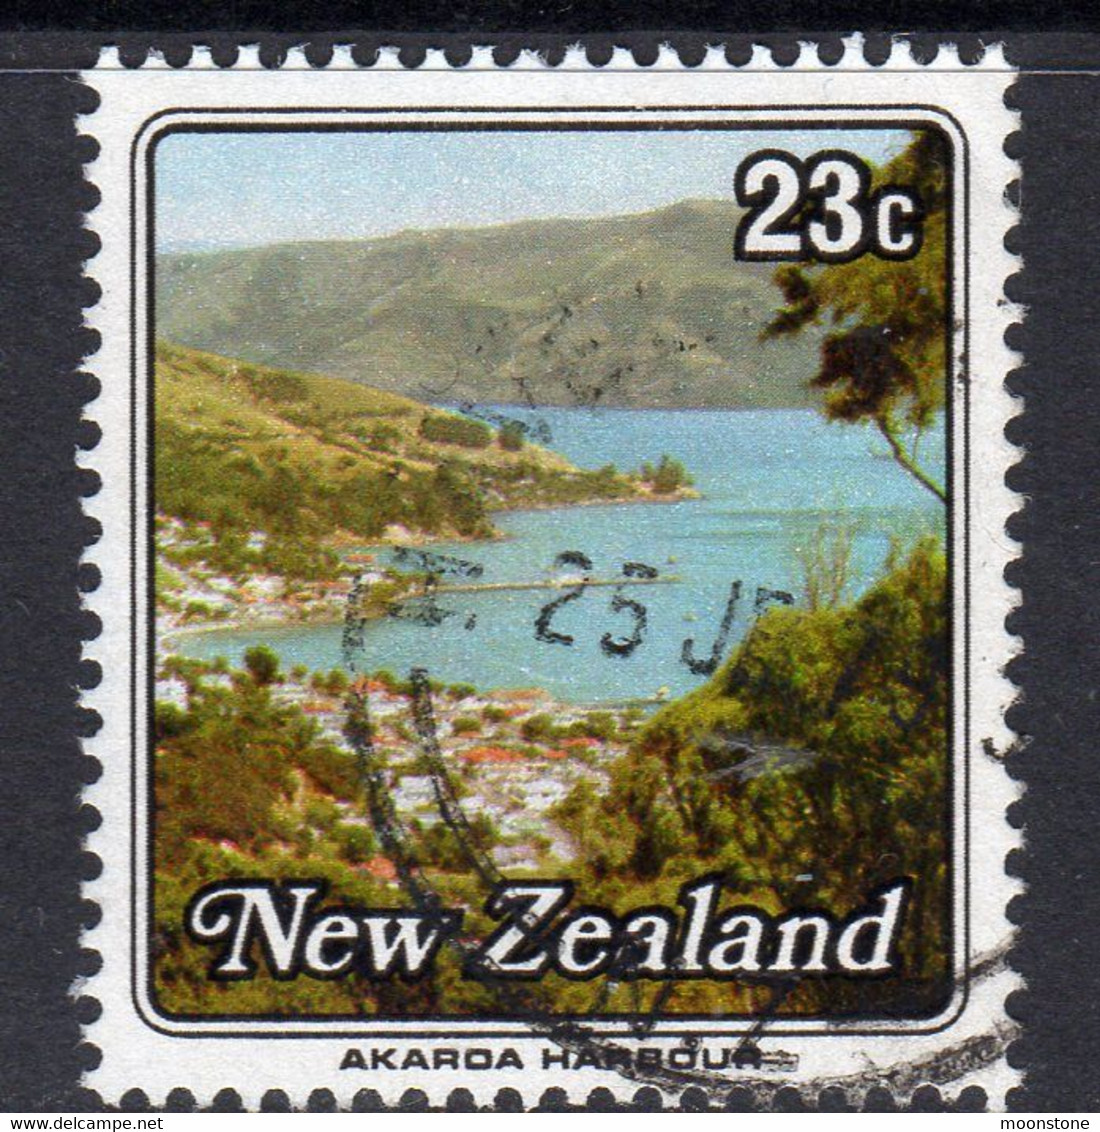 New Zealand 1979 Small Harbours 23c Value, Used, SG 1194 (A) - Gebraucht